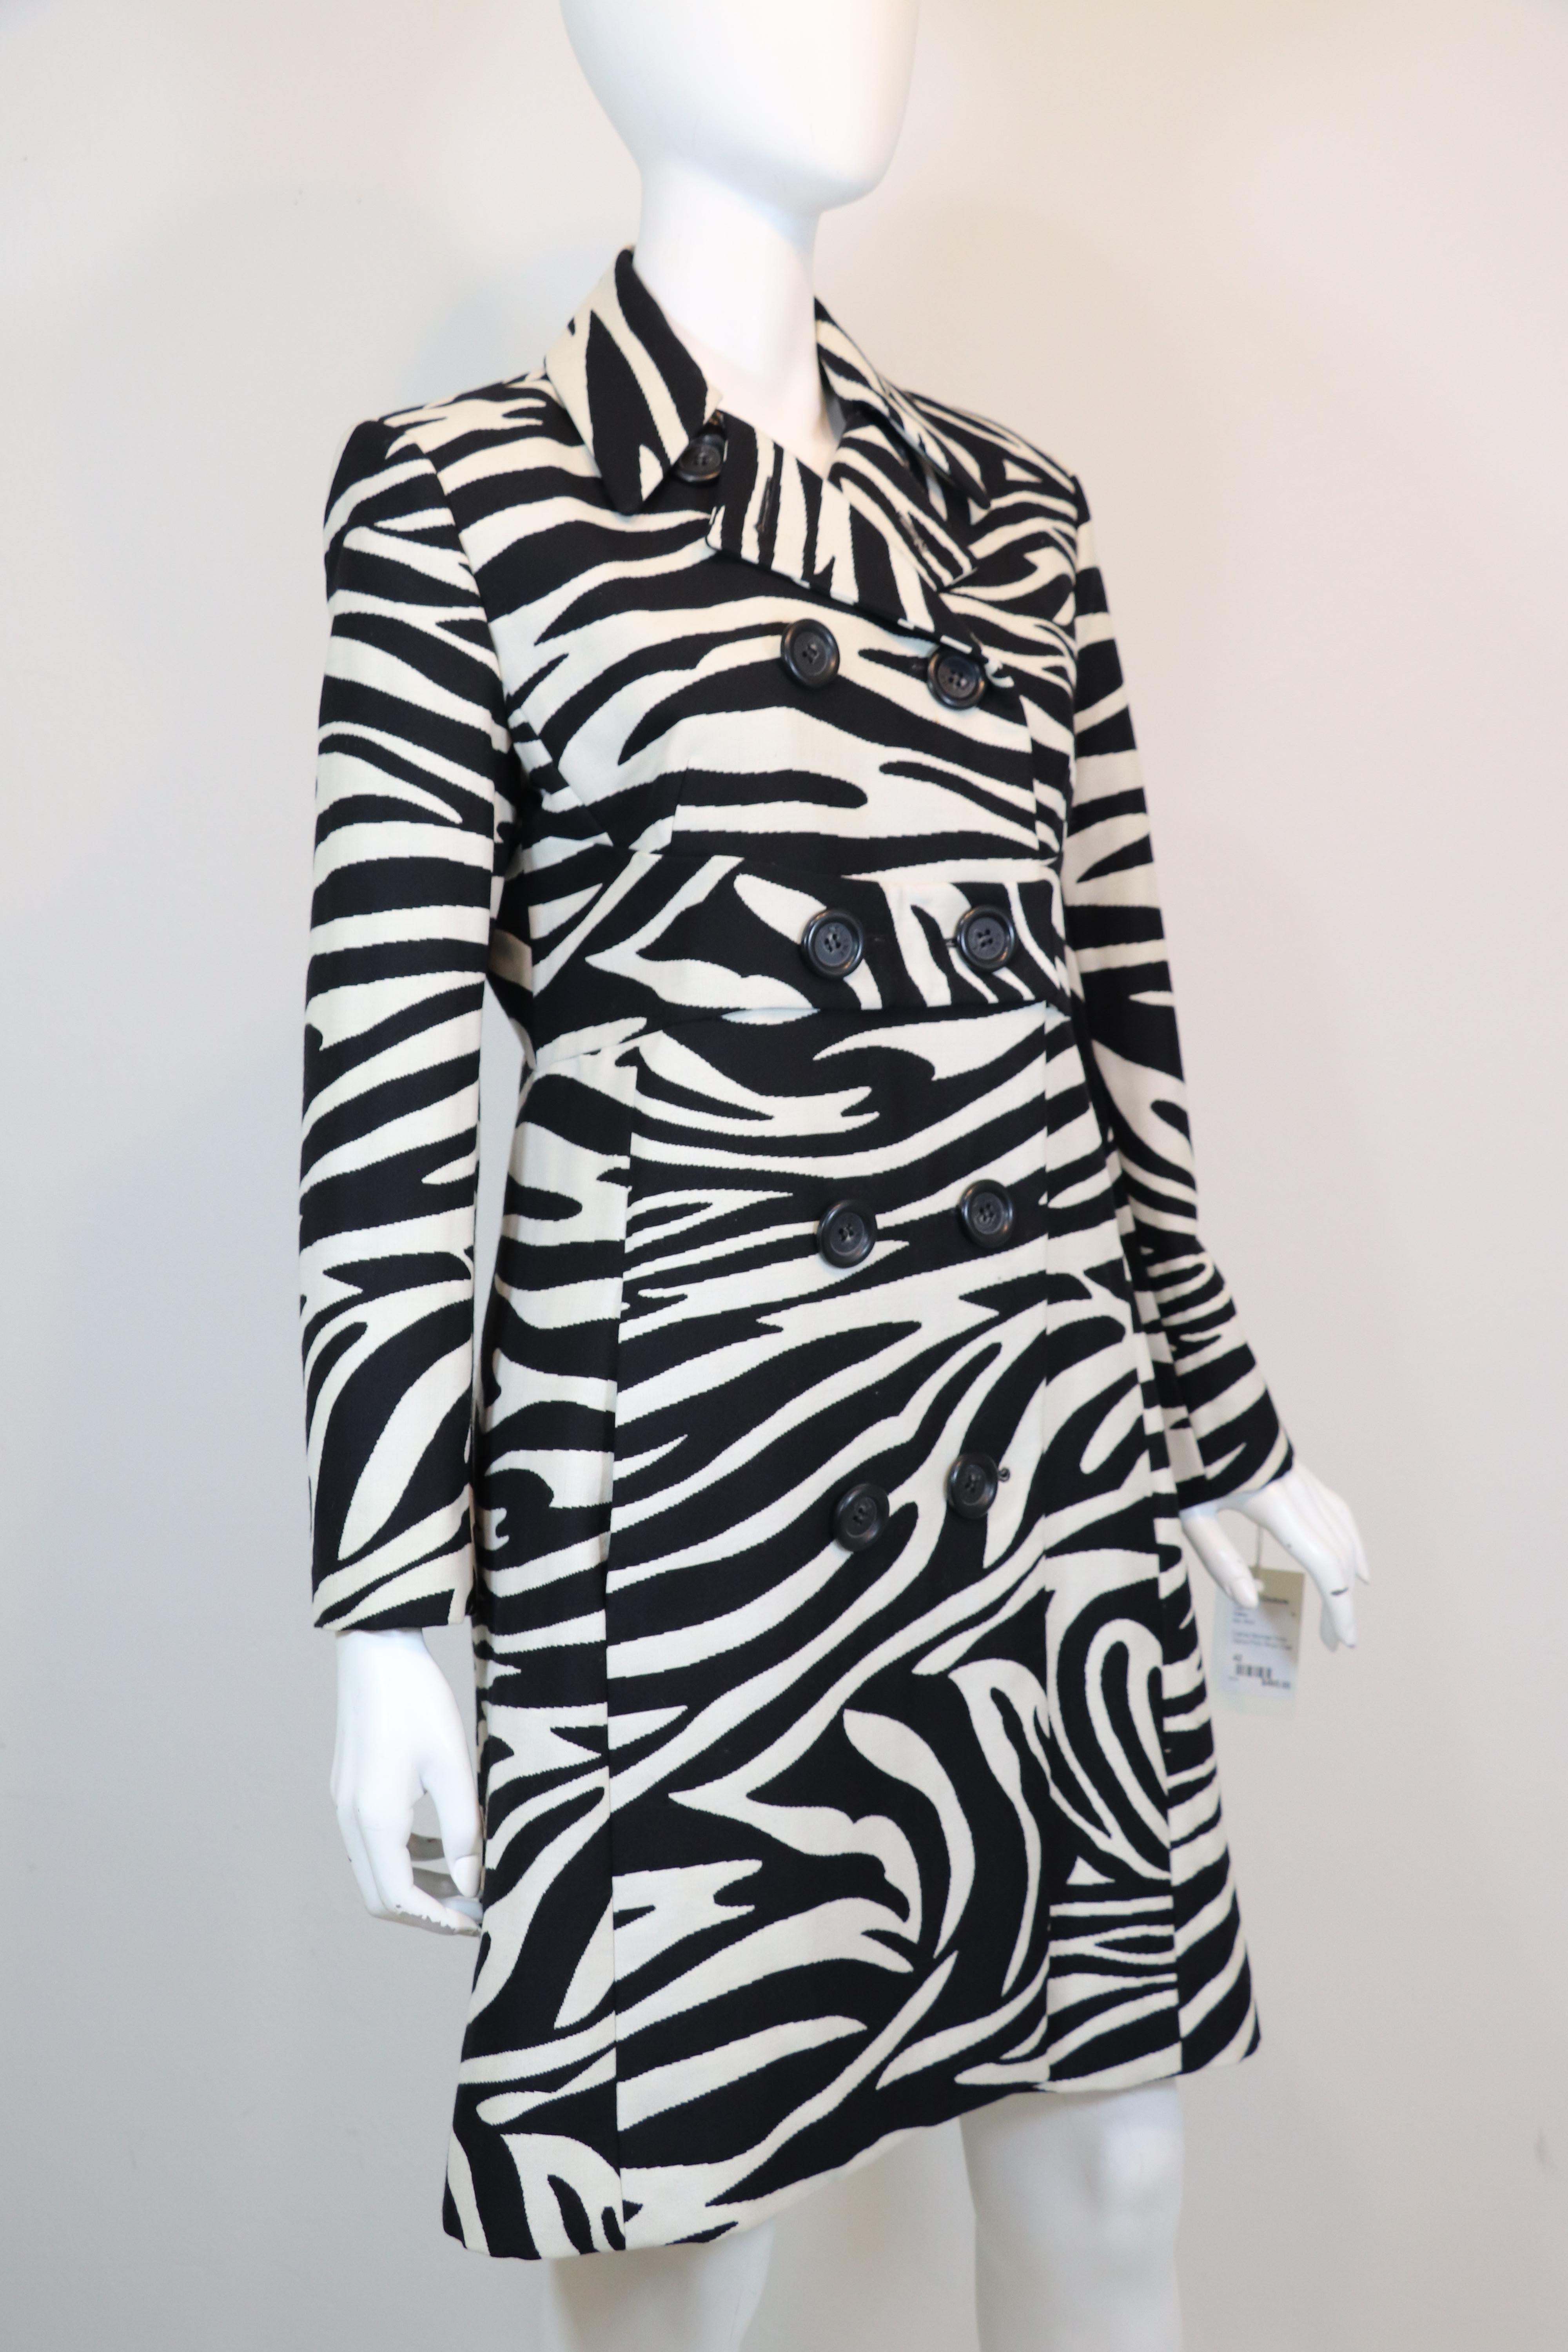 Celine structured wool coat in black and white zebra print with large black buttons, back half belt and two side pockets with a defined waist. Size 42 France. Made in France.
Bust: 39